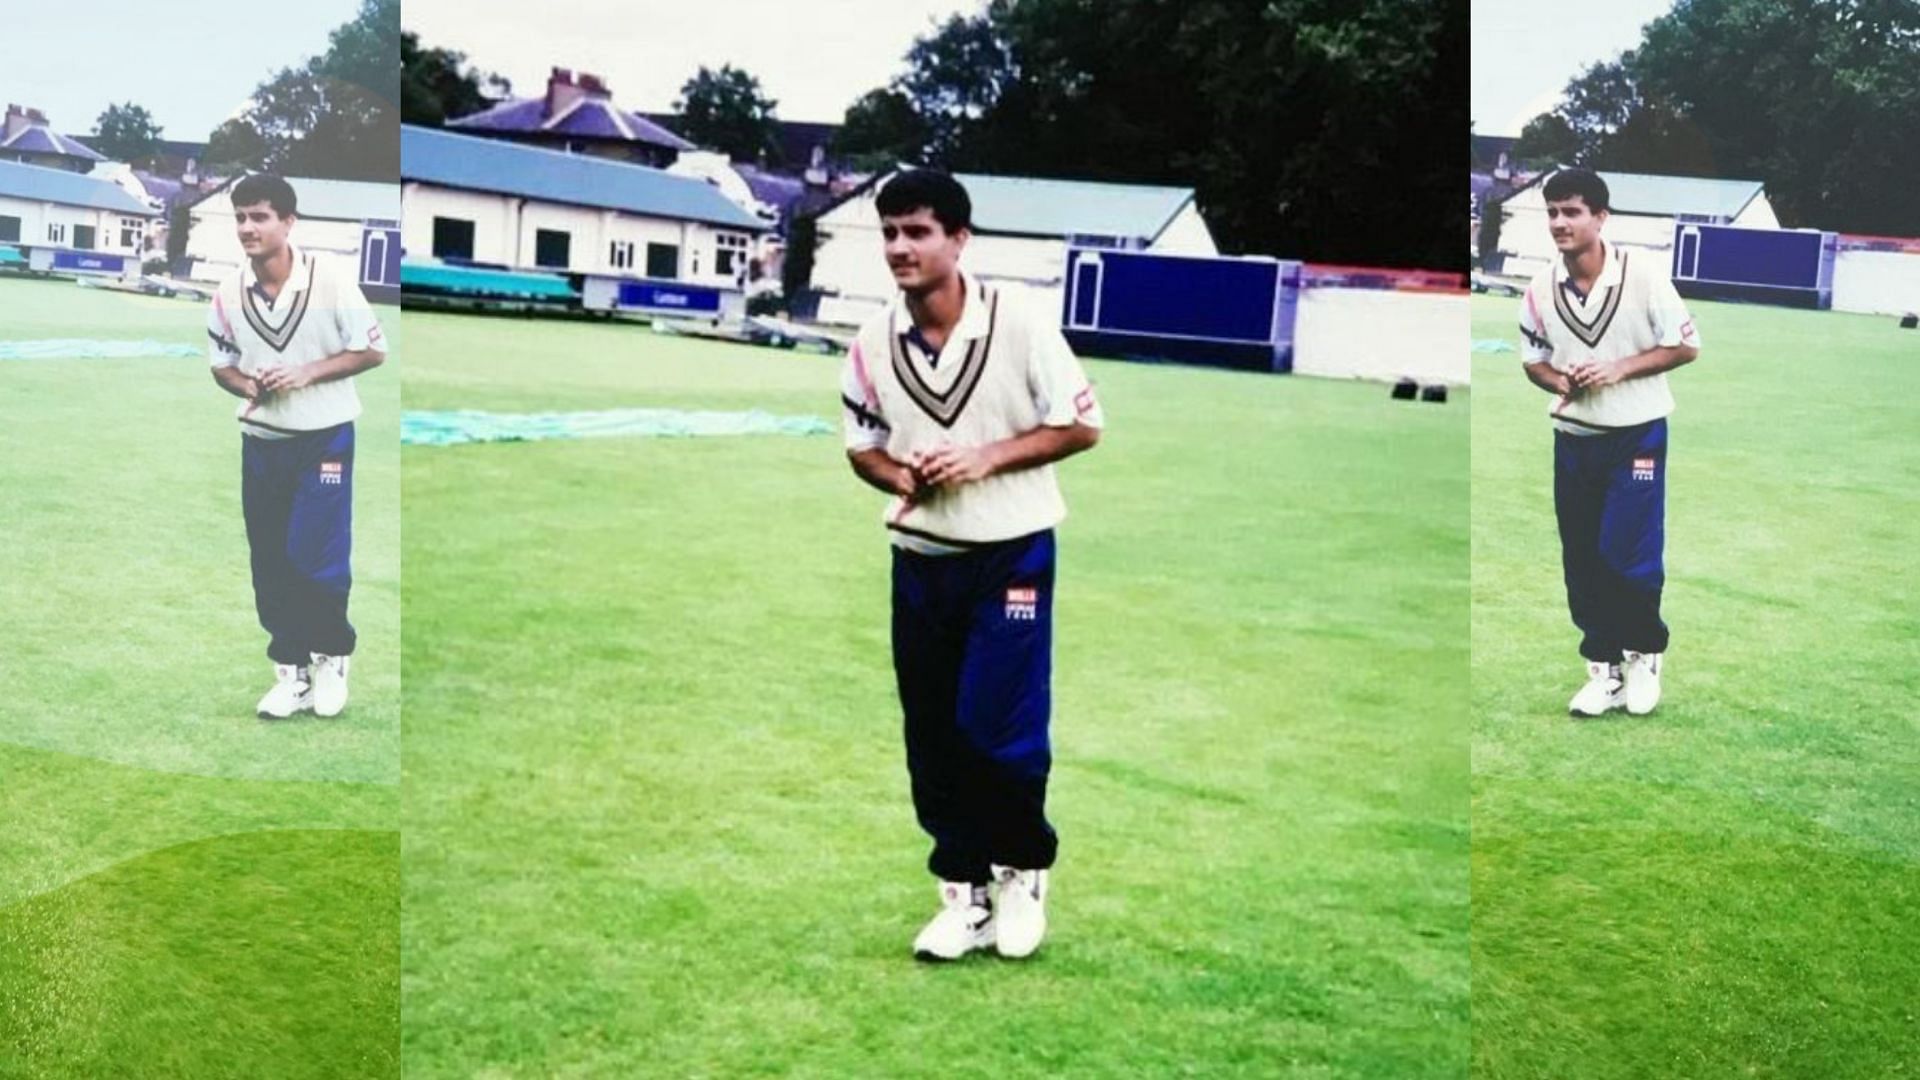 Sourav Ganguly shared a photo on his Instagram handle where he is seen training on the eve of his debut Test at Lord’s.